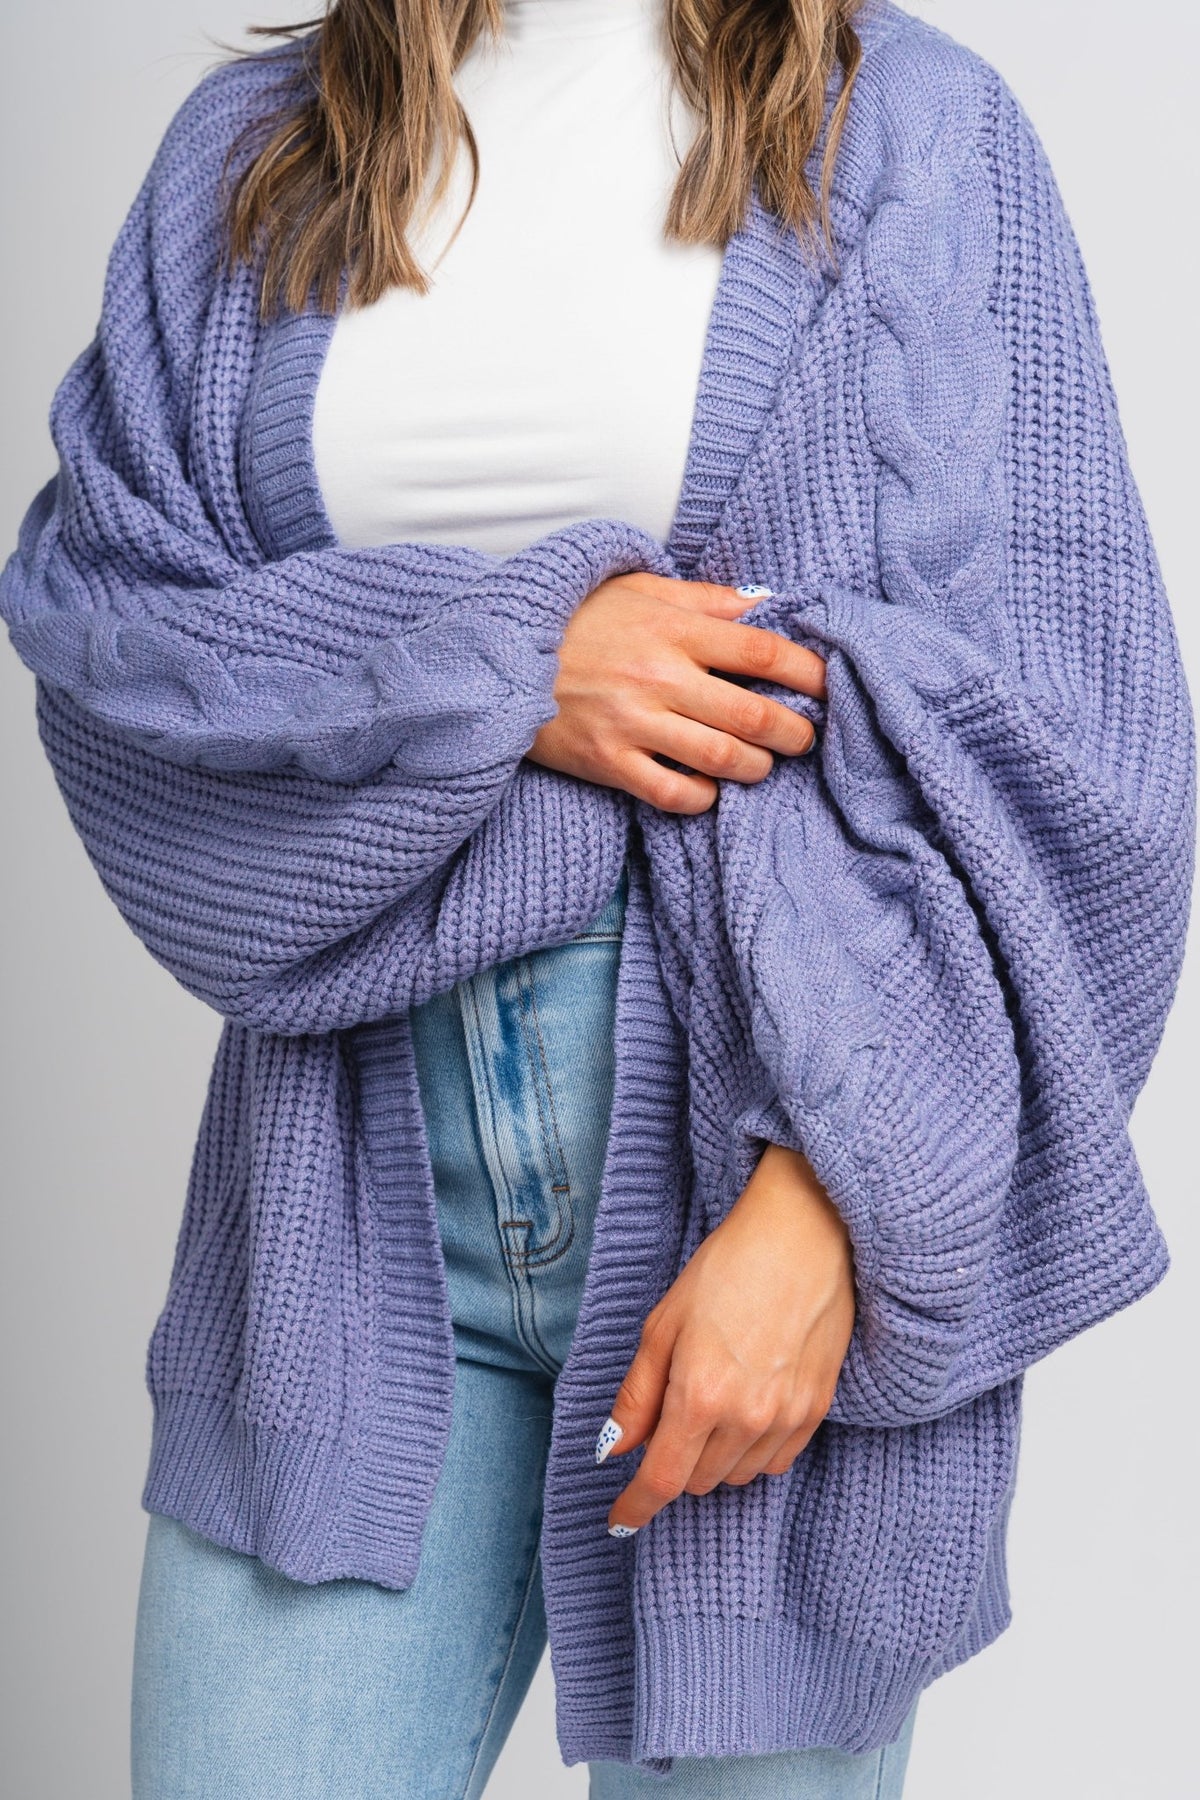 Cable knit cardigan periwinkle - Stylish Cardigan - Cute Easter Outfits at Lush Fashion Lounge Boutique in Oklahoma